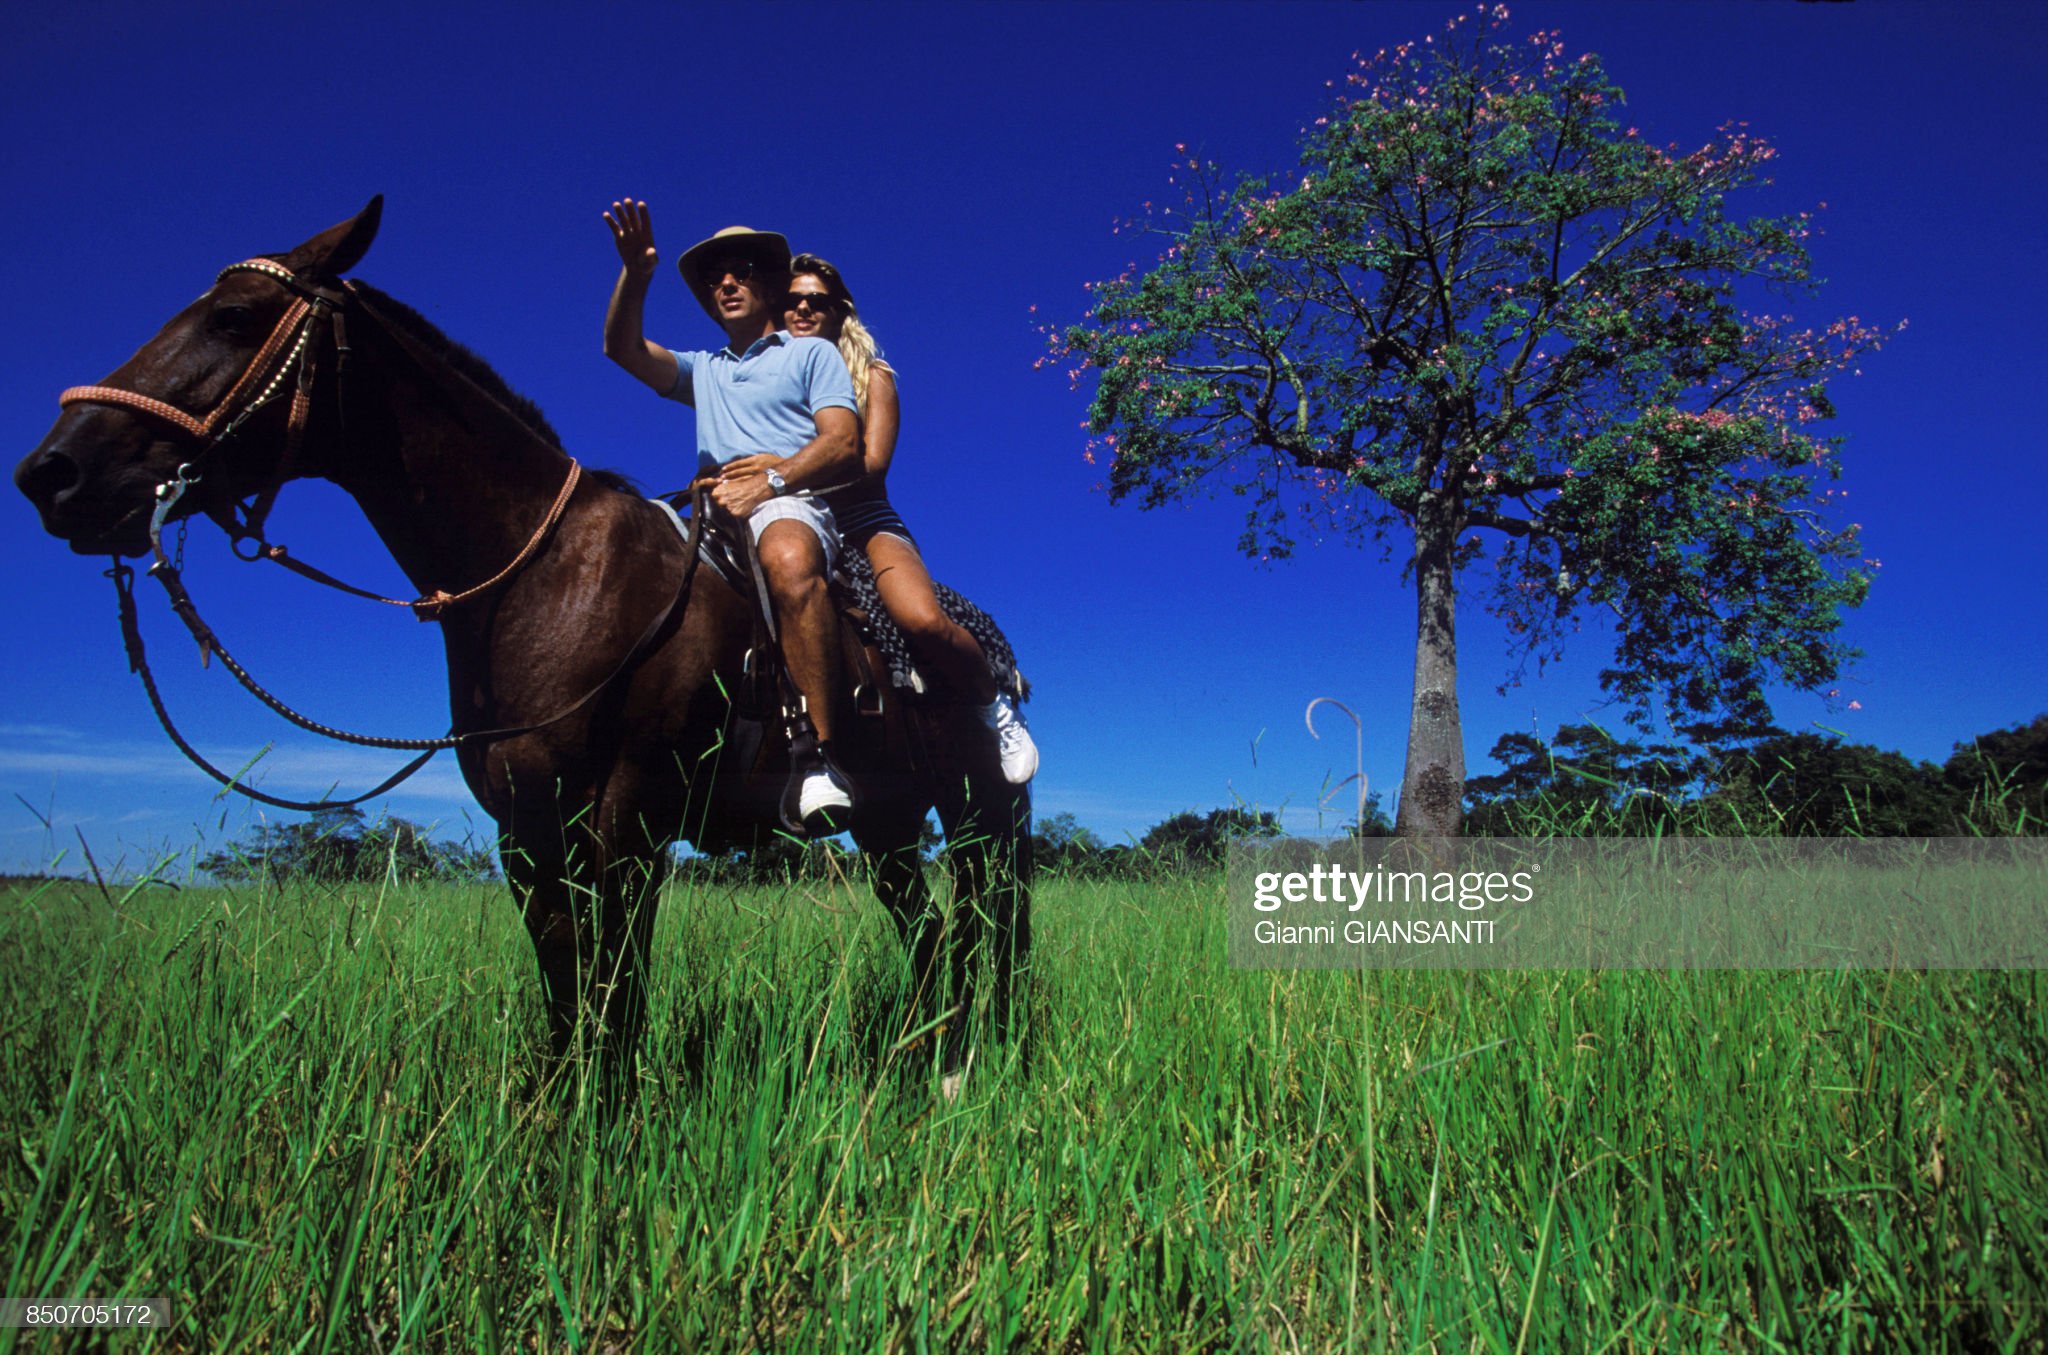 Ayrton and Adriane on a horse.